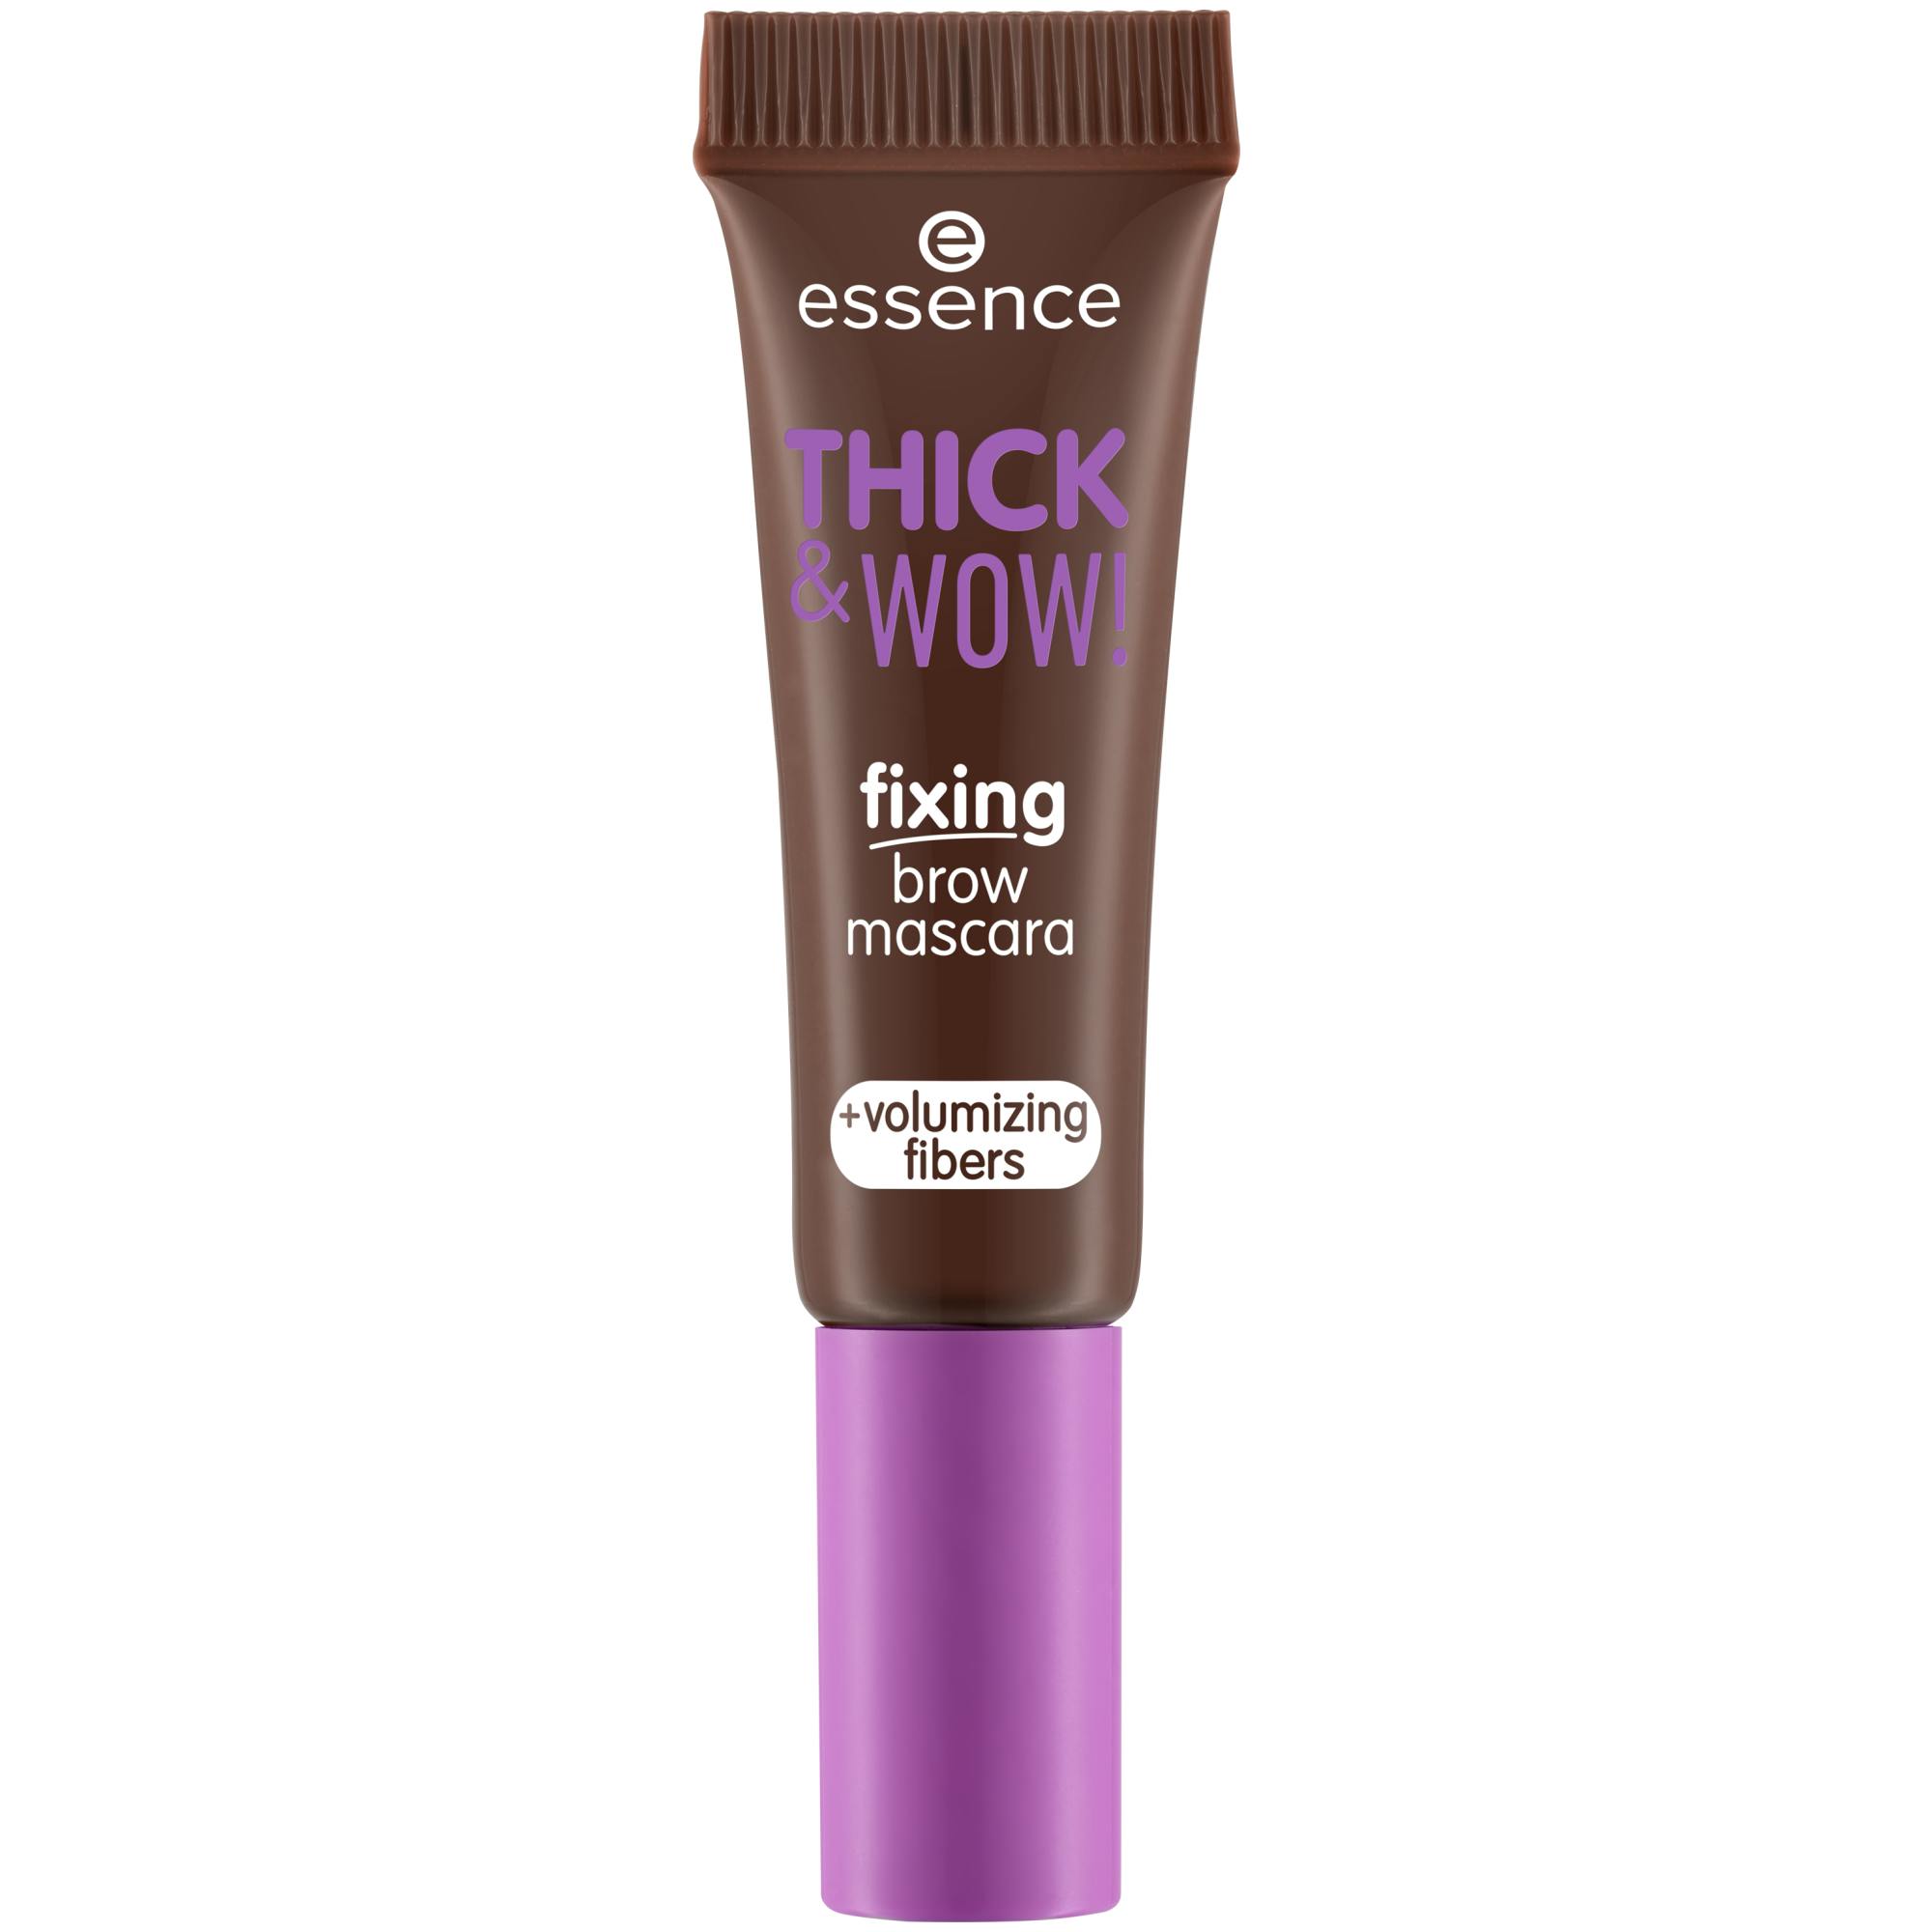 essence THICK & WOW! fixing brow mascara Augenbrauengel